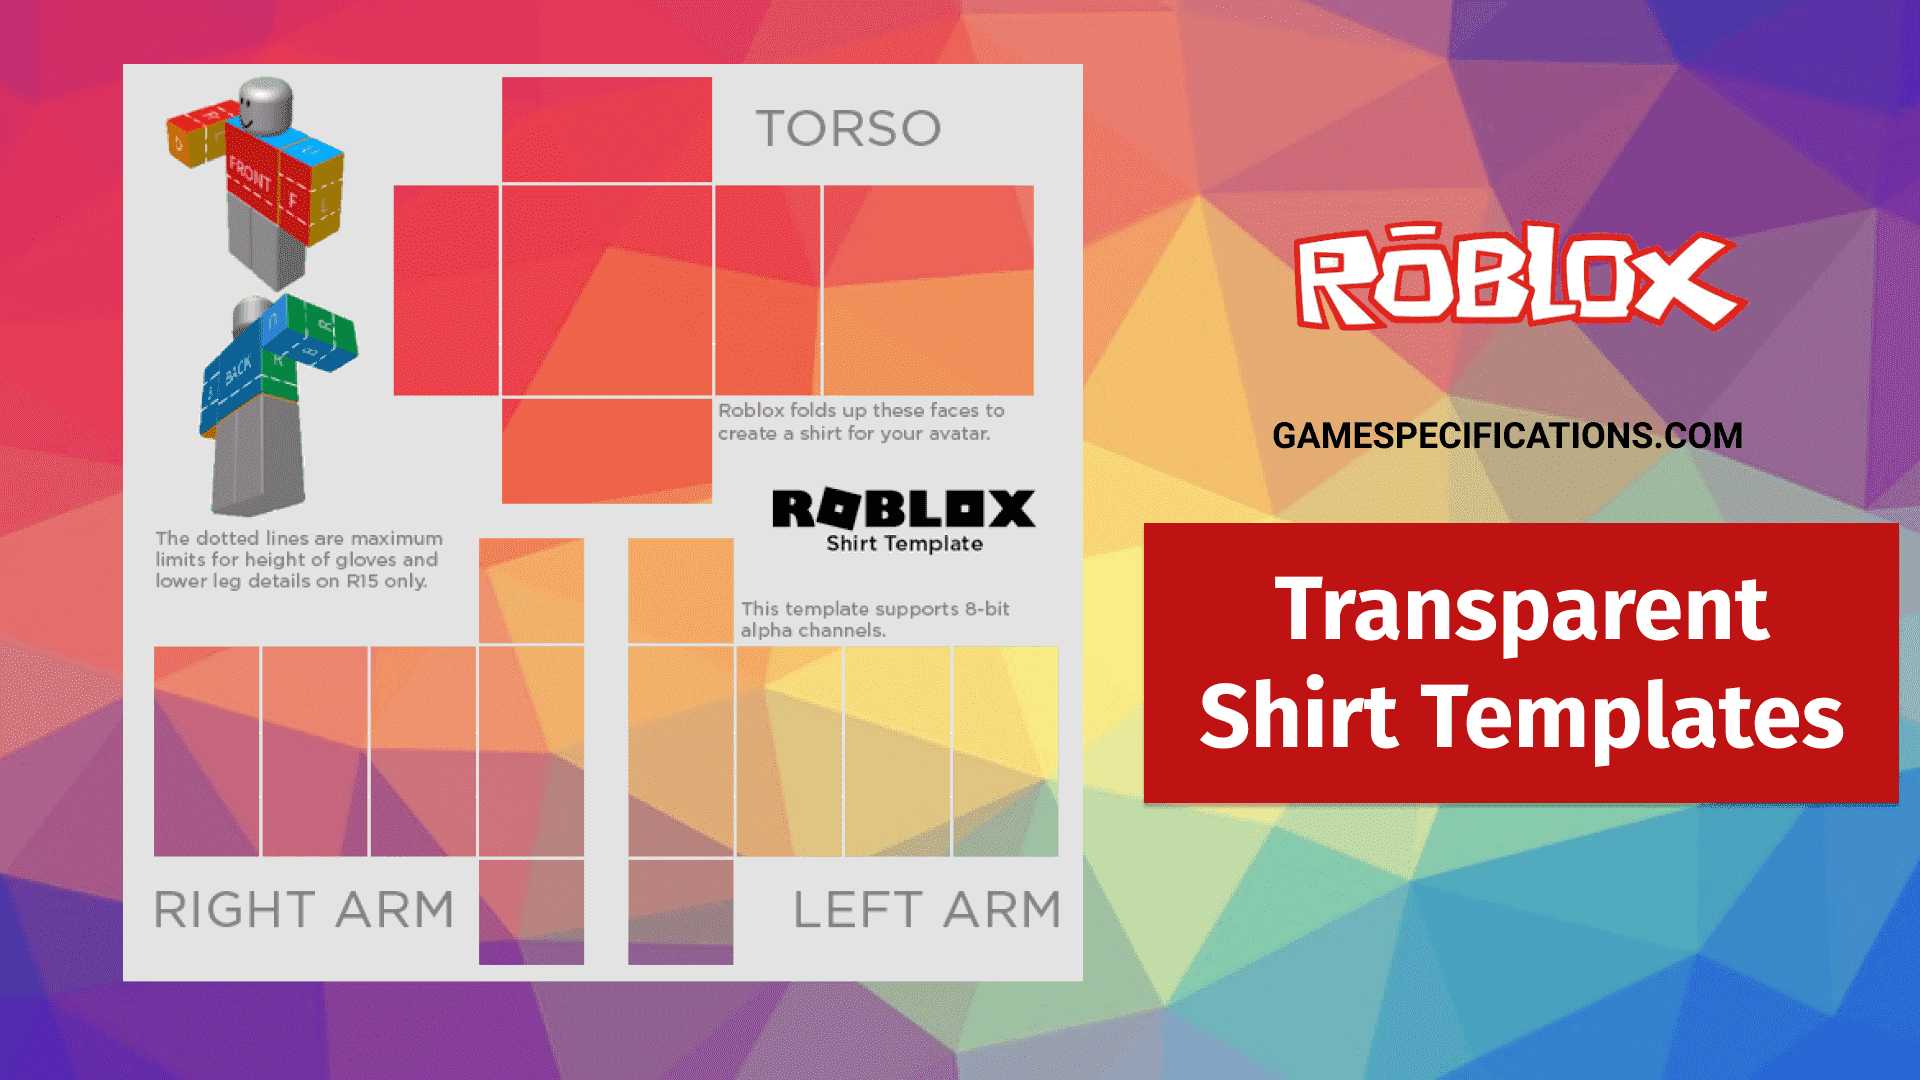 Roblox Transparent Shirt Templates And How To Make Them Game Specifications - how to create a shirt on roblox 2021 on windowa